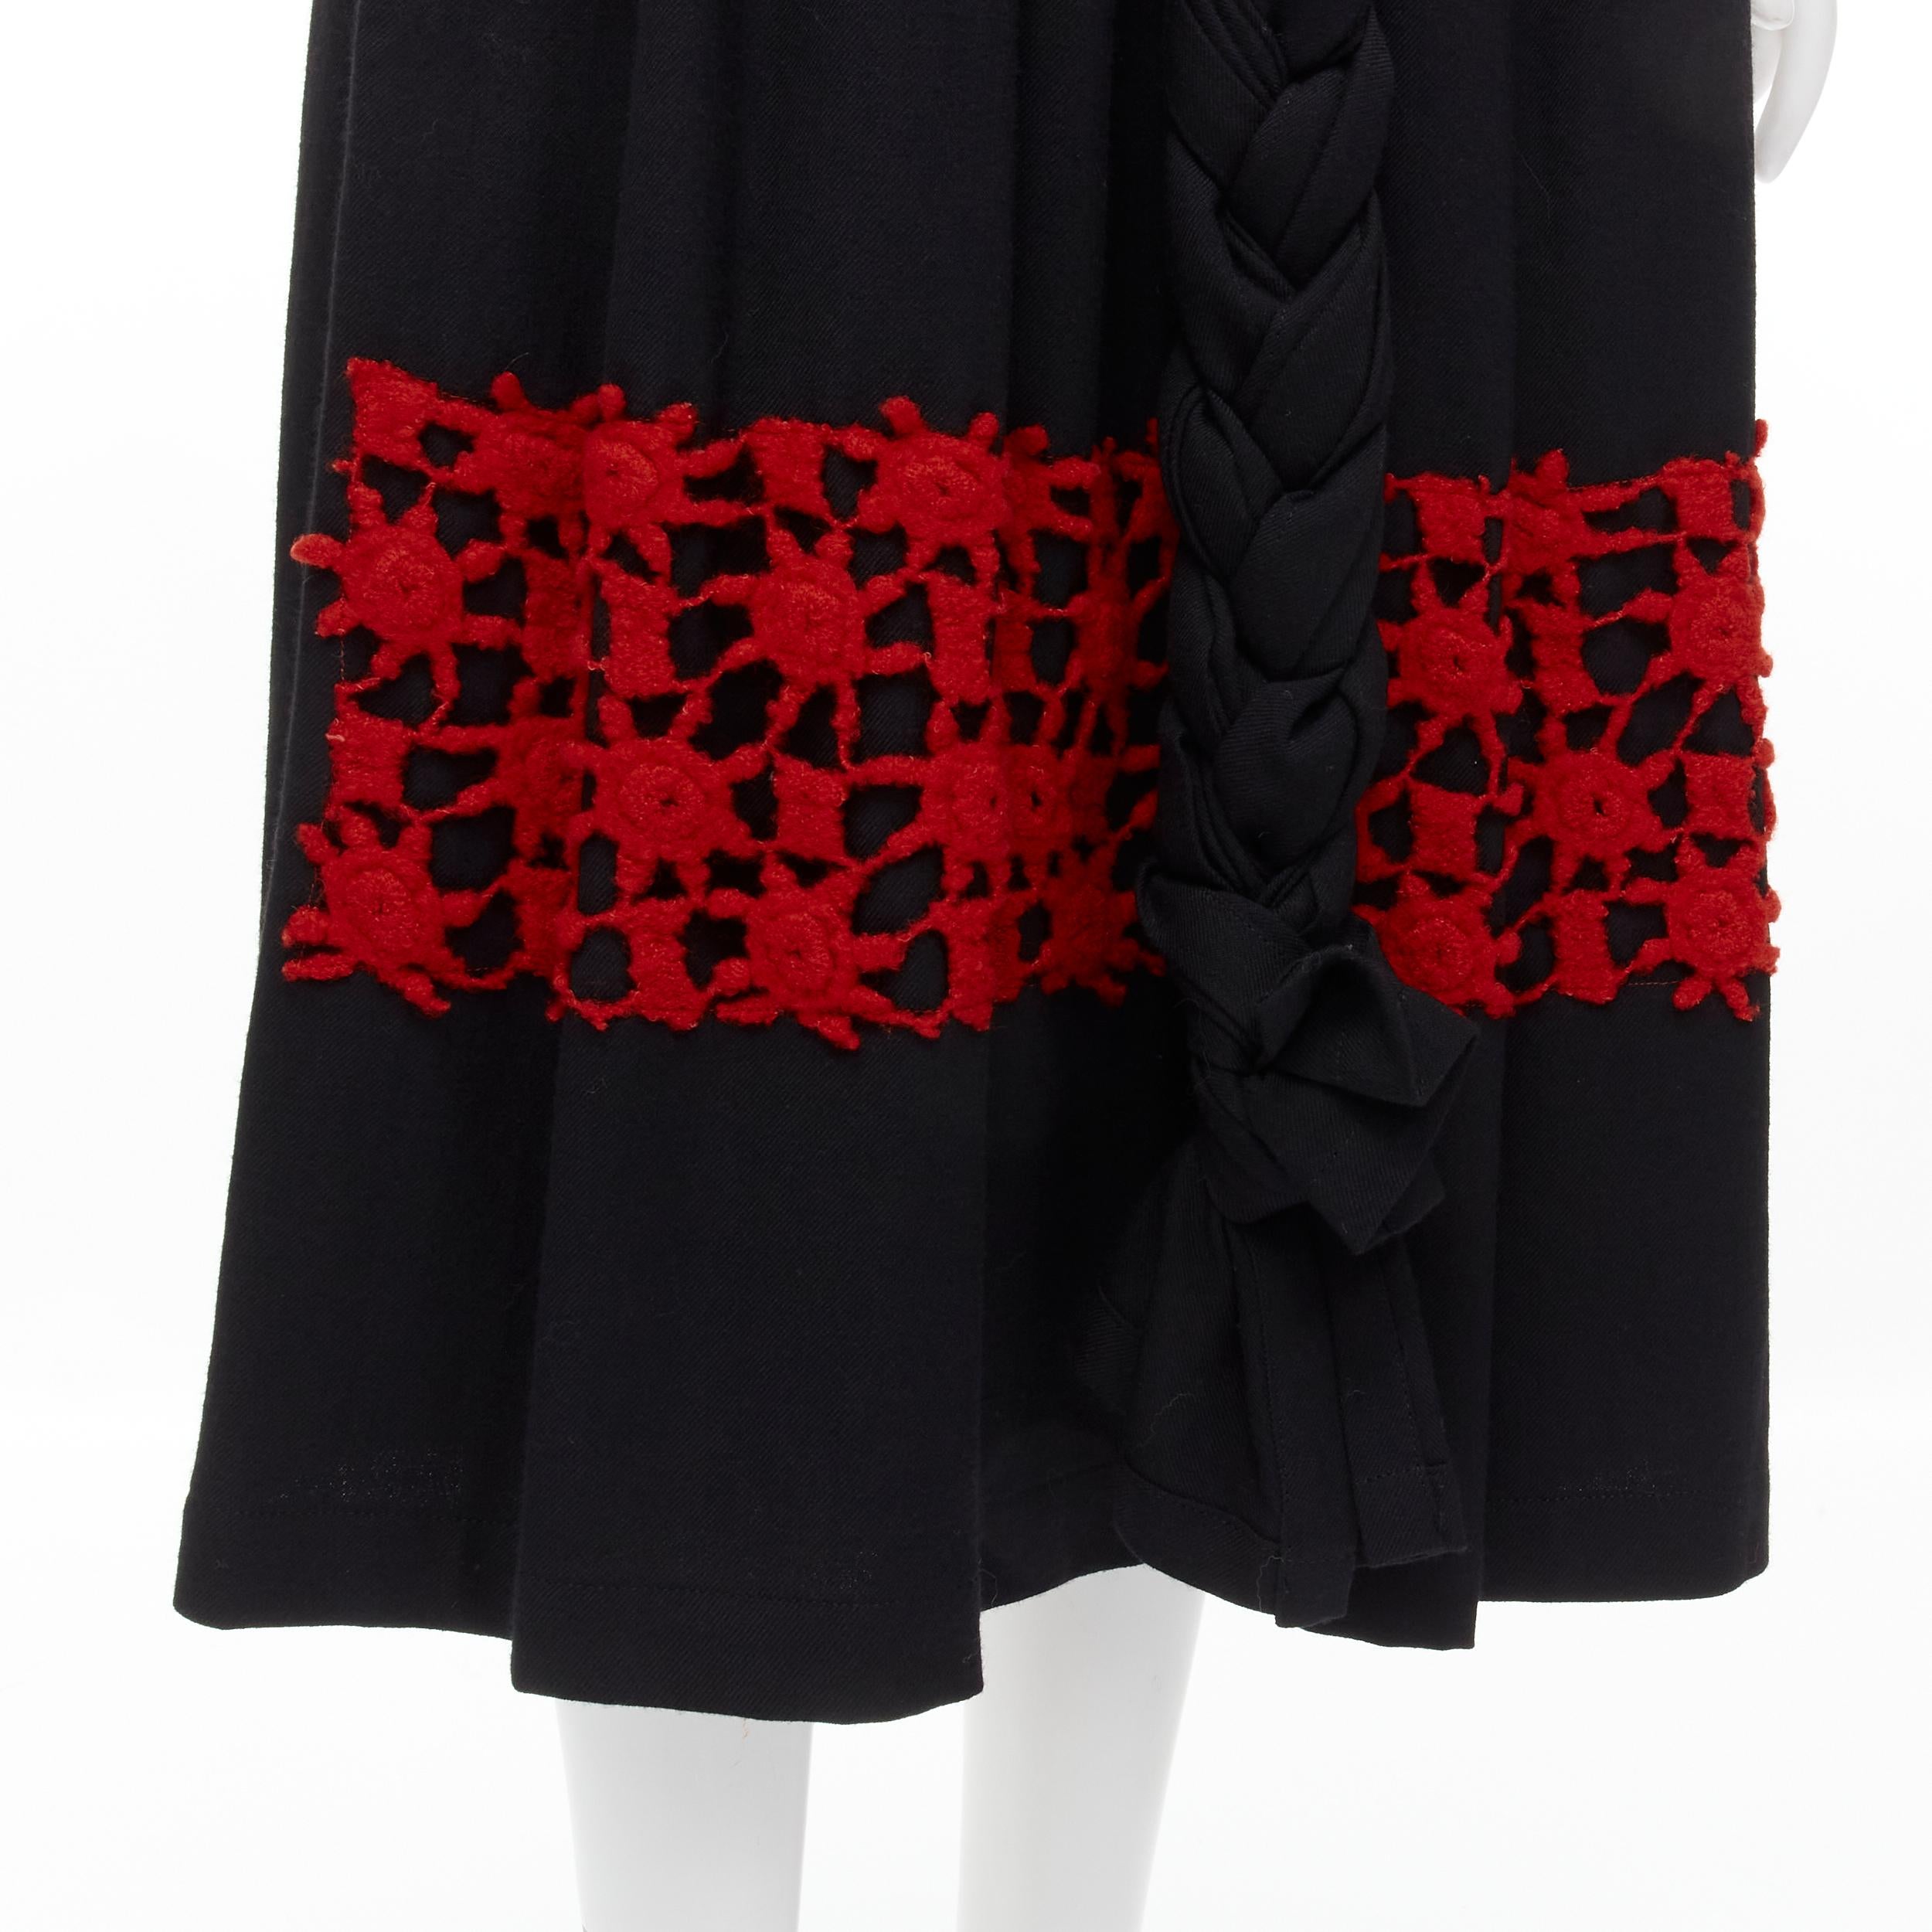 COMME DES GARCONS Vintage 1988 black wool braid red lattice embroidery skirt M 
Reference: CRTI/A00559 
Brand: Comme Des Garcons 
Designer: Rei Kawakubo 
Collection: 1988 
Material: Wool 
Color: Black 
Pattern: Solid 
Closure: Embroidery 
Extra